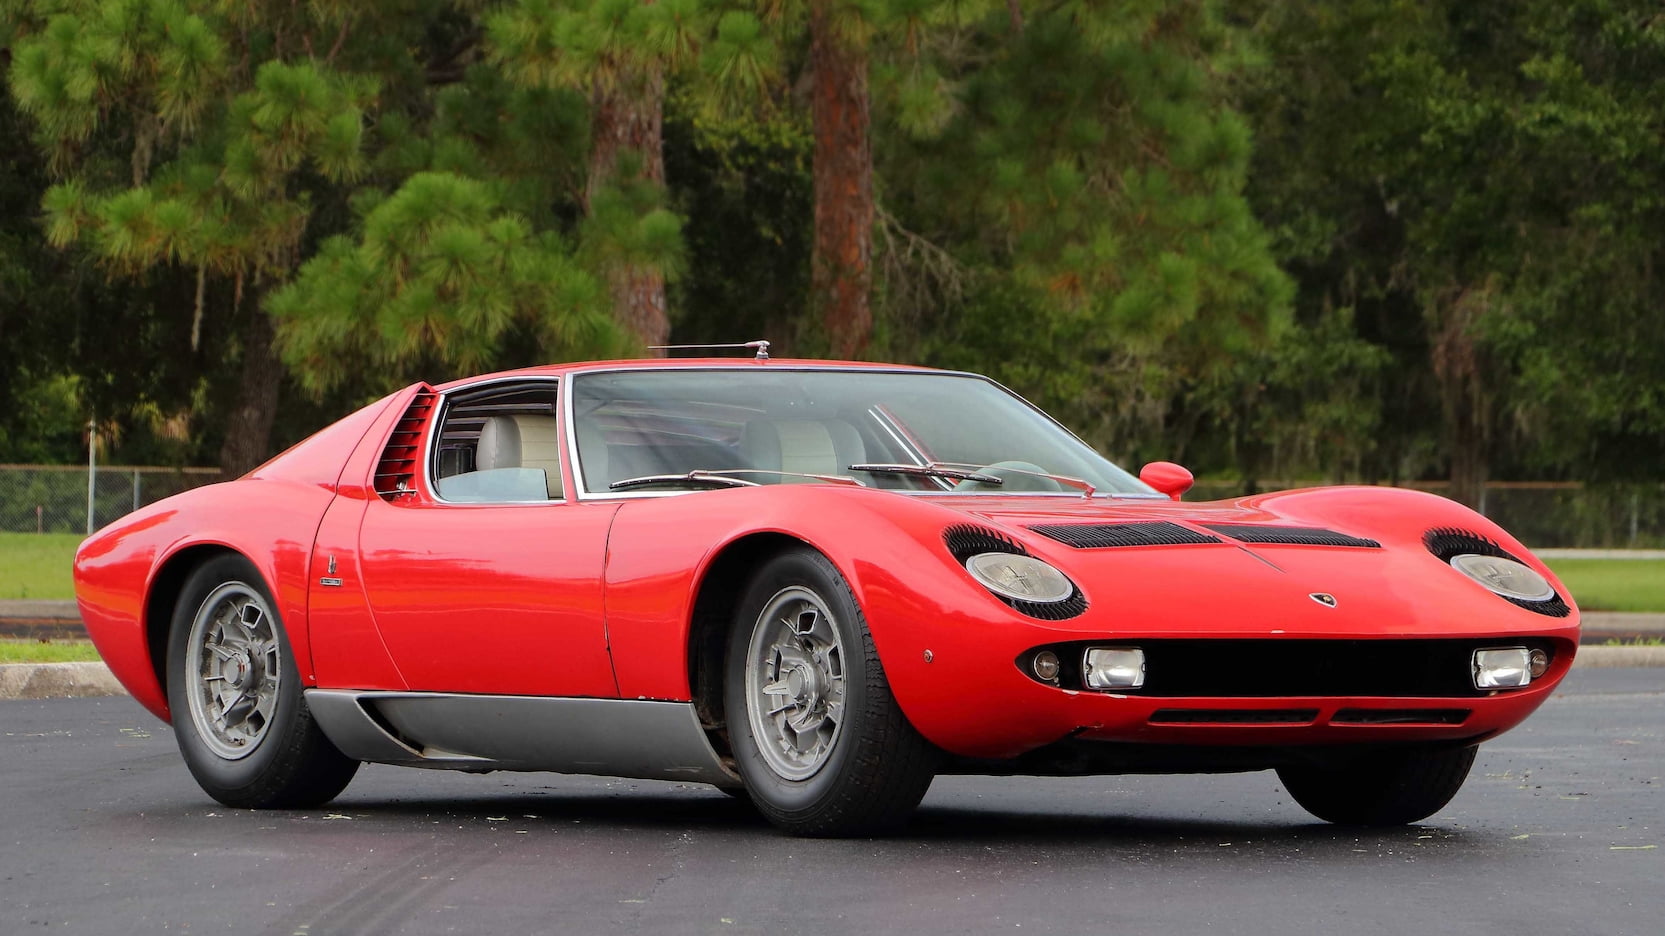 Bright red Lamborghini Miura sitting on road with trees in background